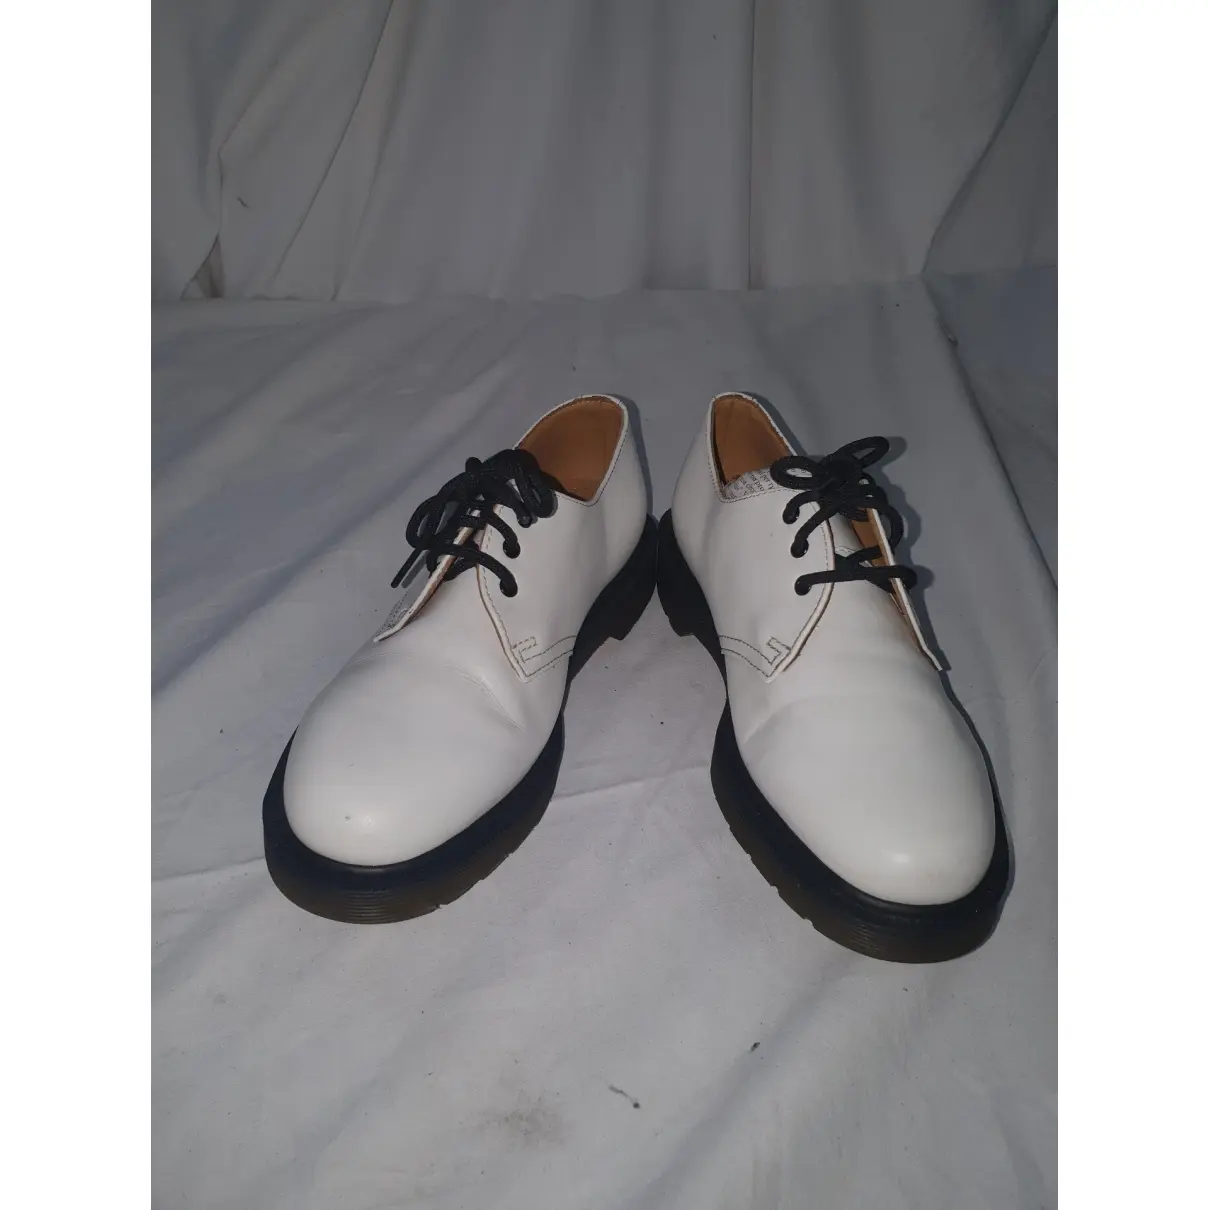 Dr. Martens 1461 (3 eye) leather lace ups for sale